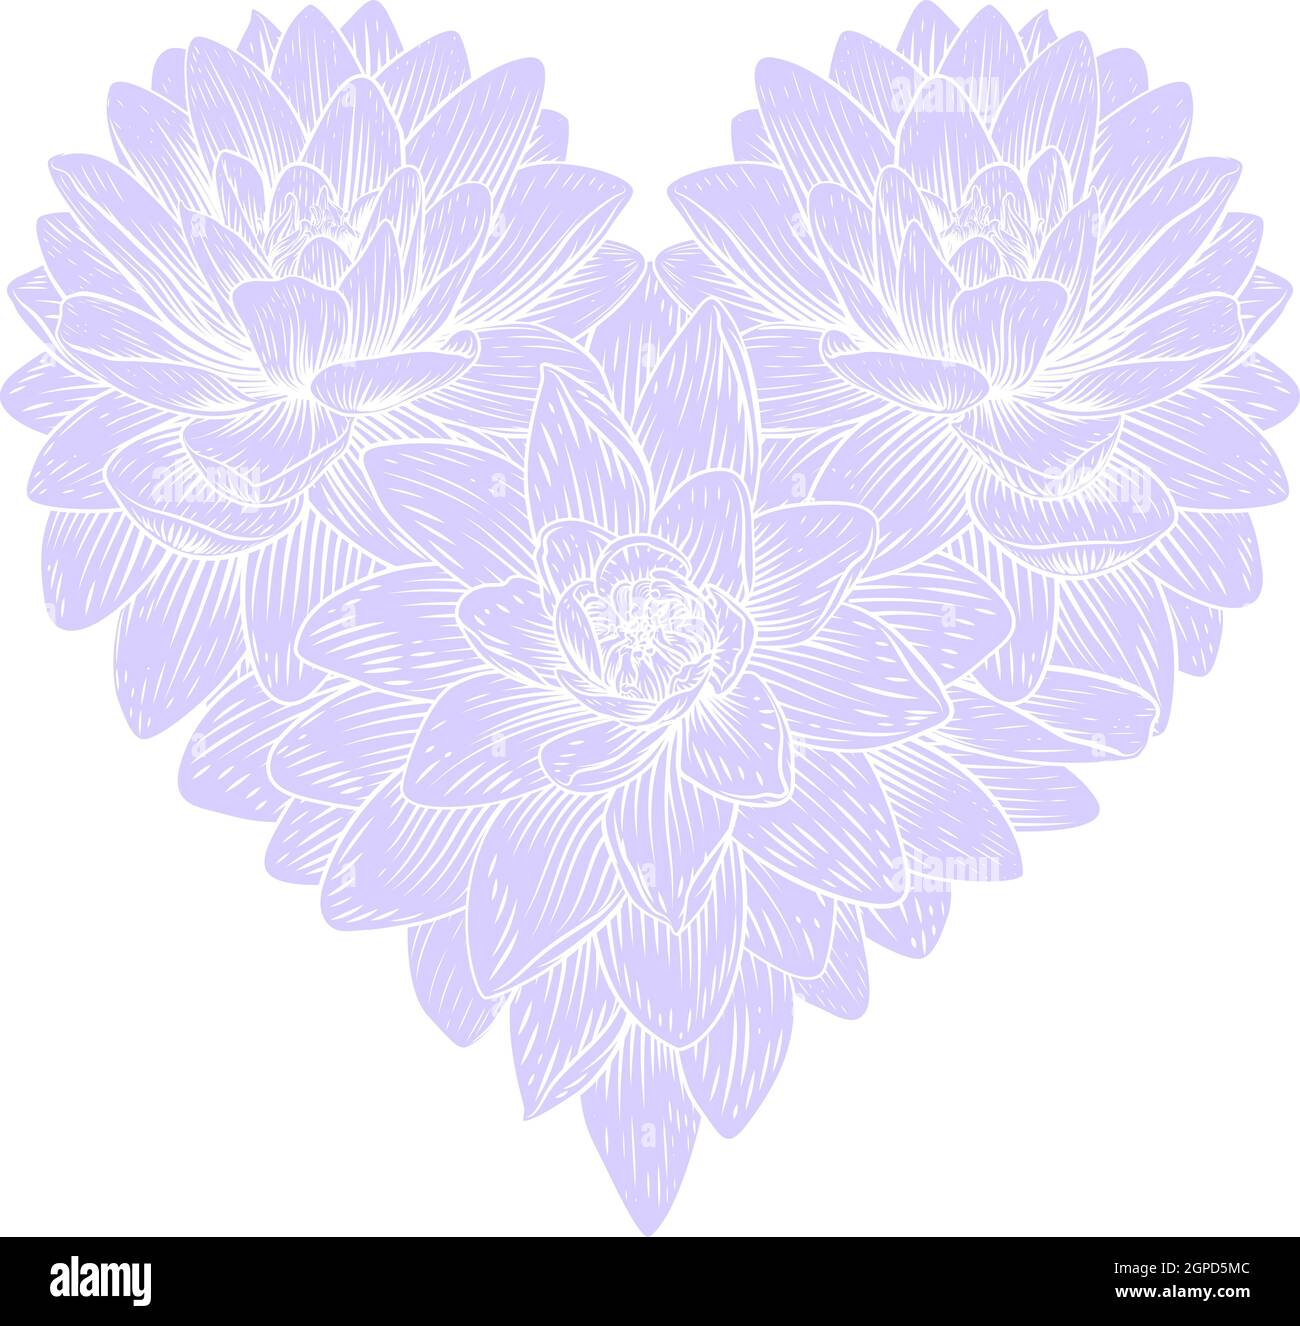 Heart Flower Love Floral Vintage Etching Stock Vector